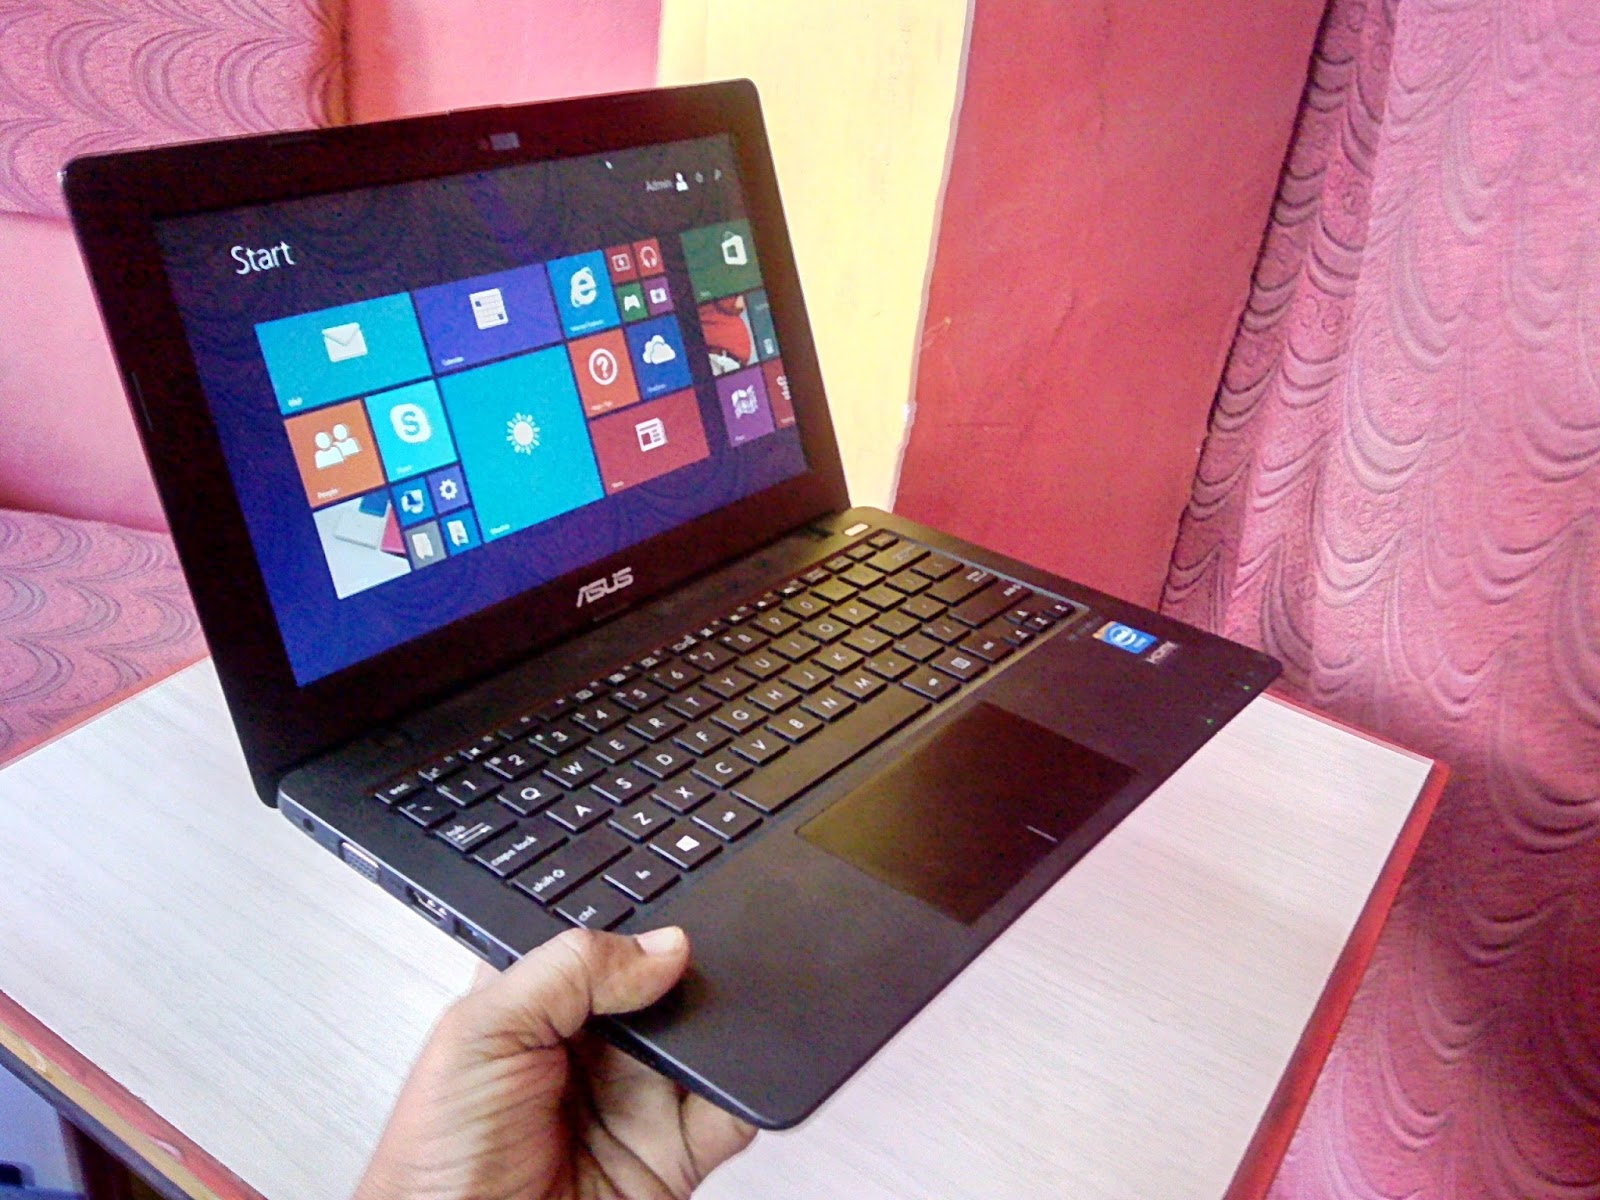 learn-new-things-asus-x200ma-laptop-price-specification-hands-on